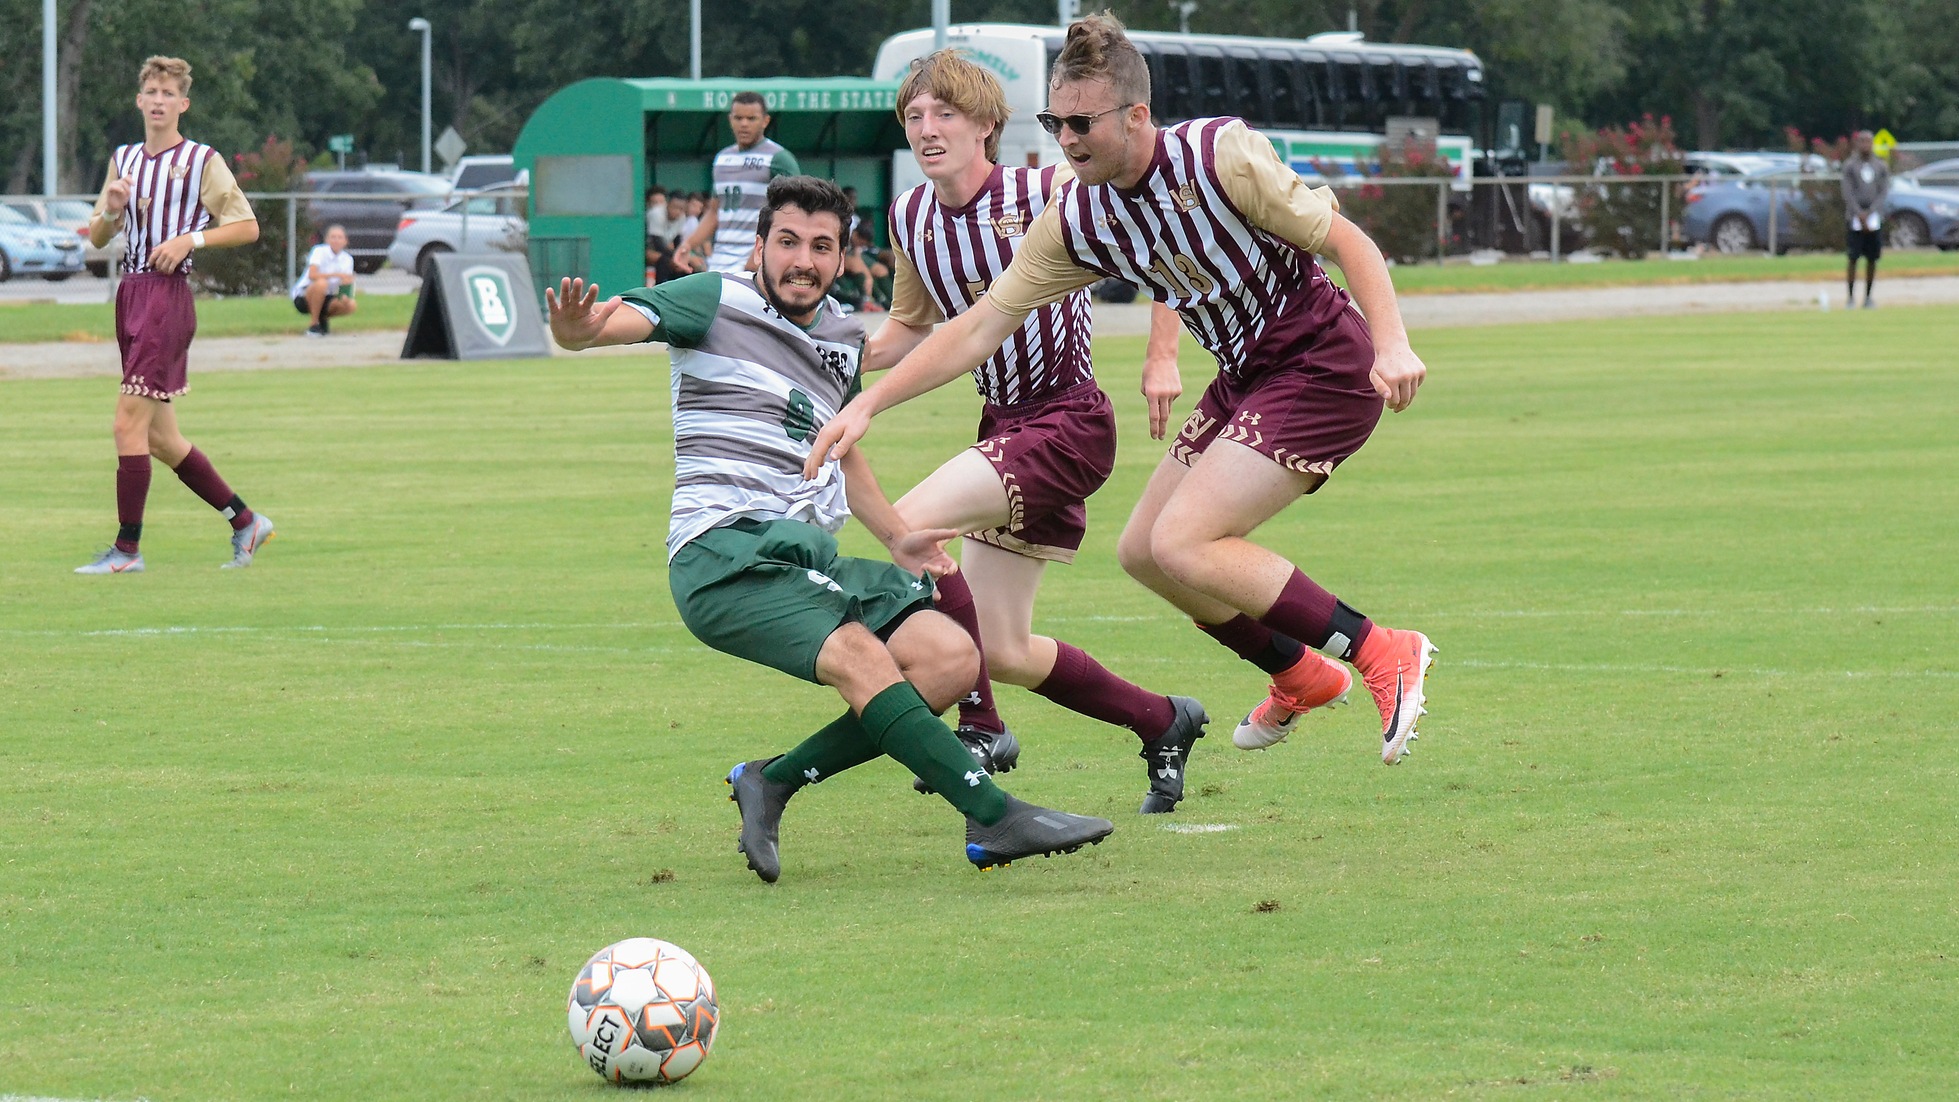 Early Lead Sets up Victory for Men's Soccer